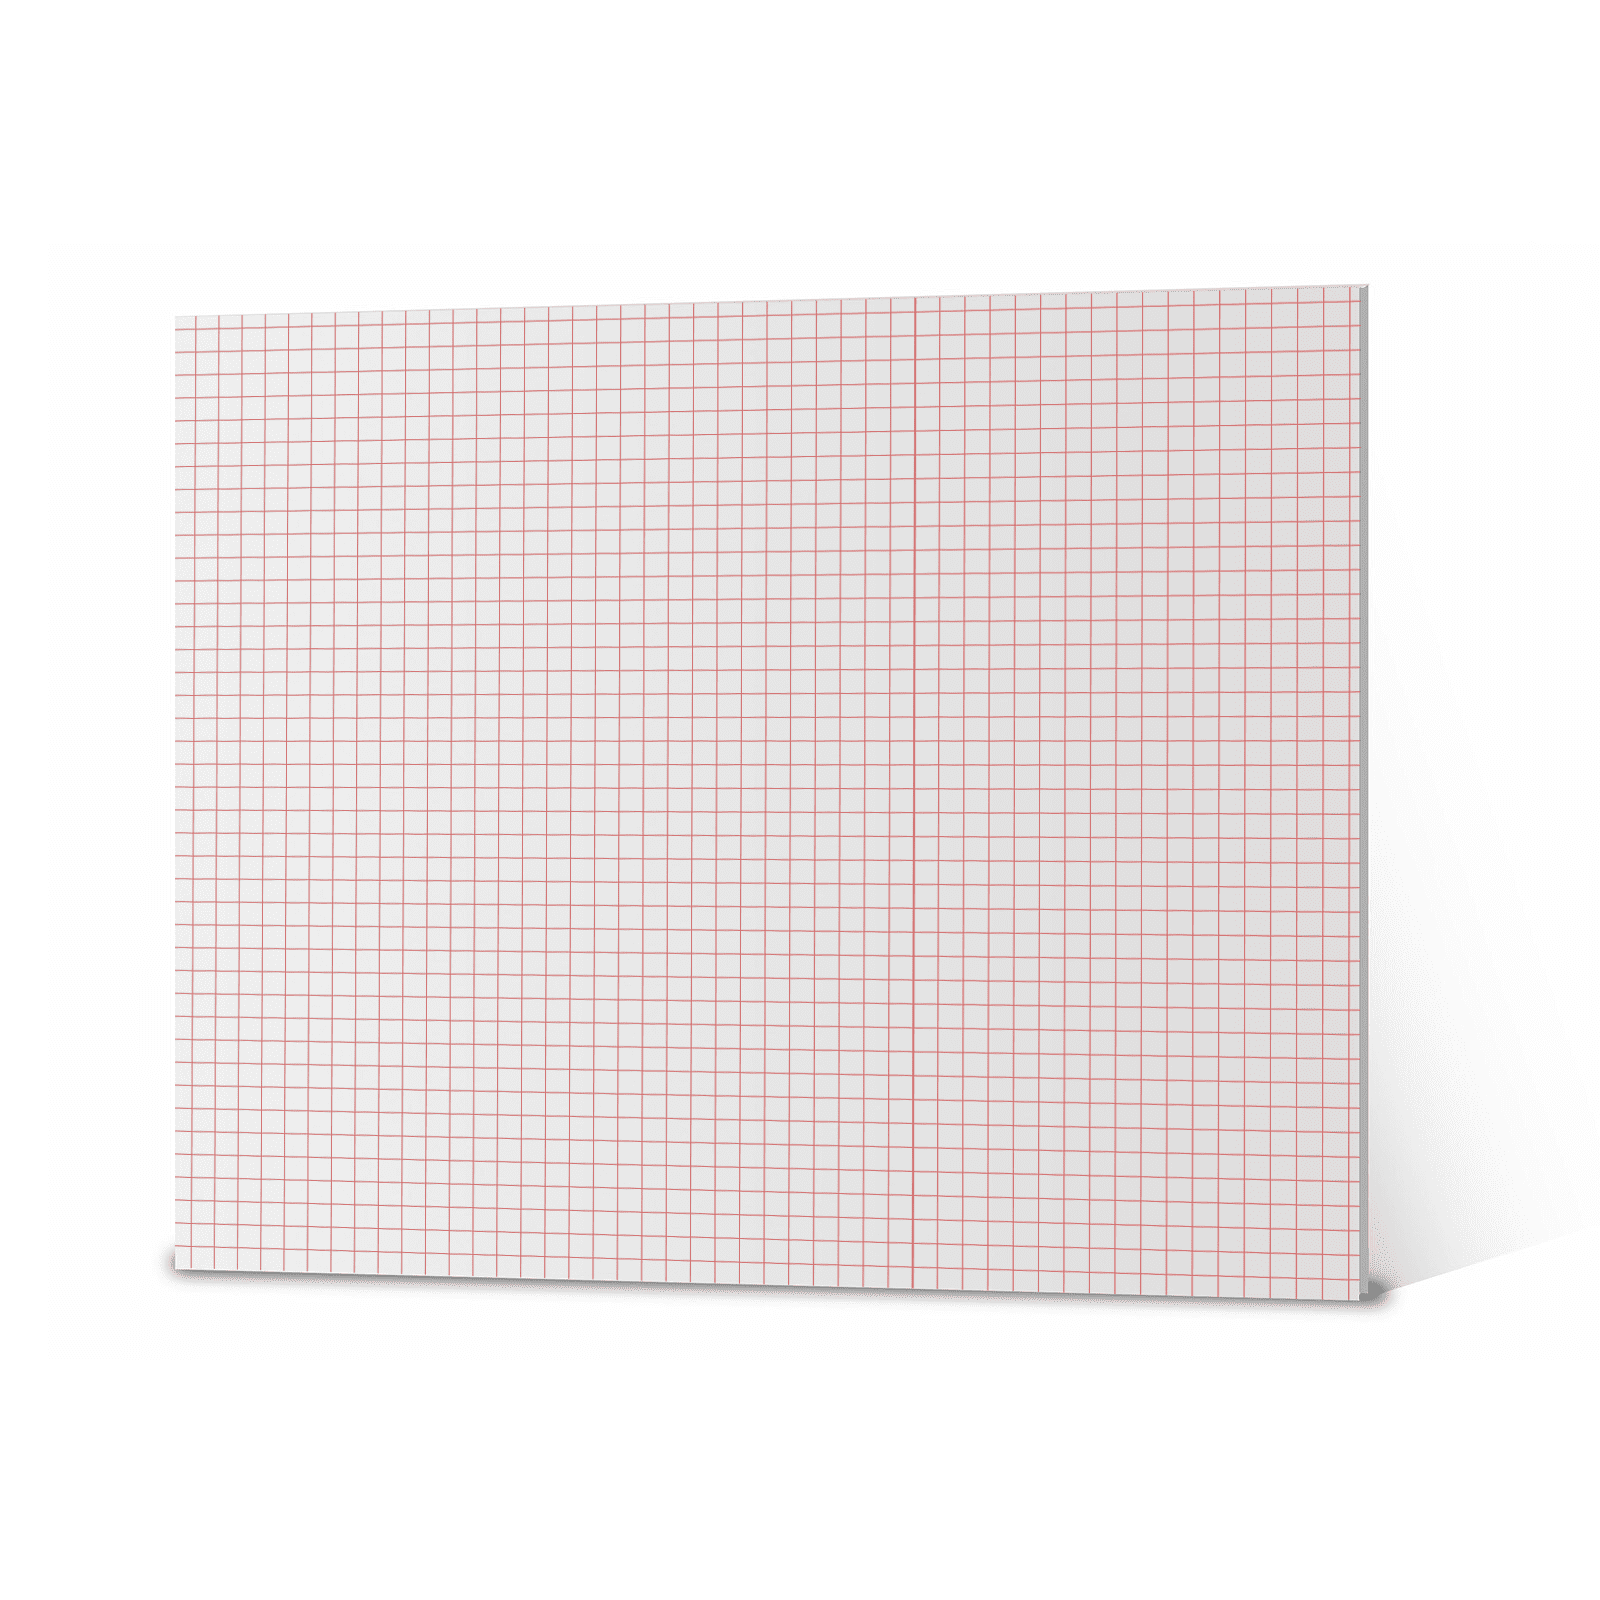 Framer Supply Heat Activated White Foamboard 3/16in 32 x 40 25 Sheets 